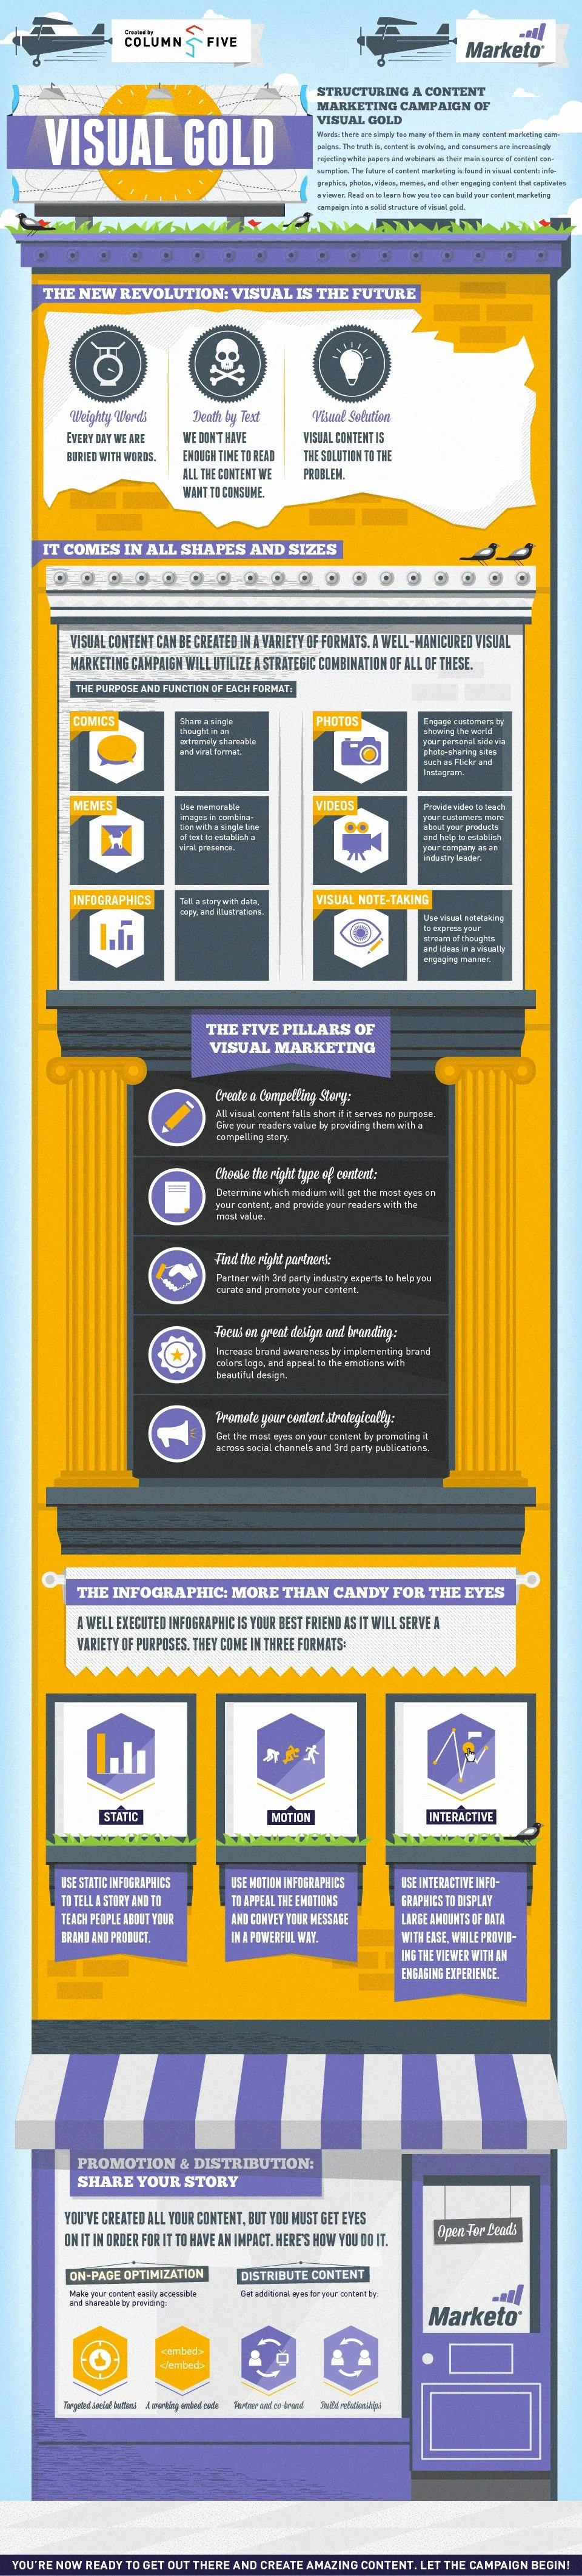 Visual Gold! The New Revolution of Content Marketing - #Infographic